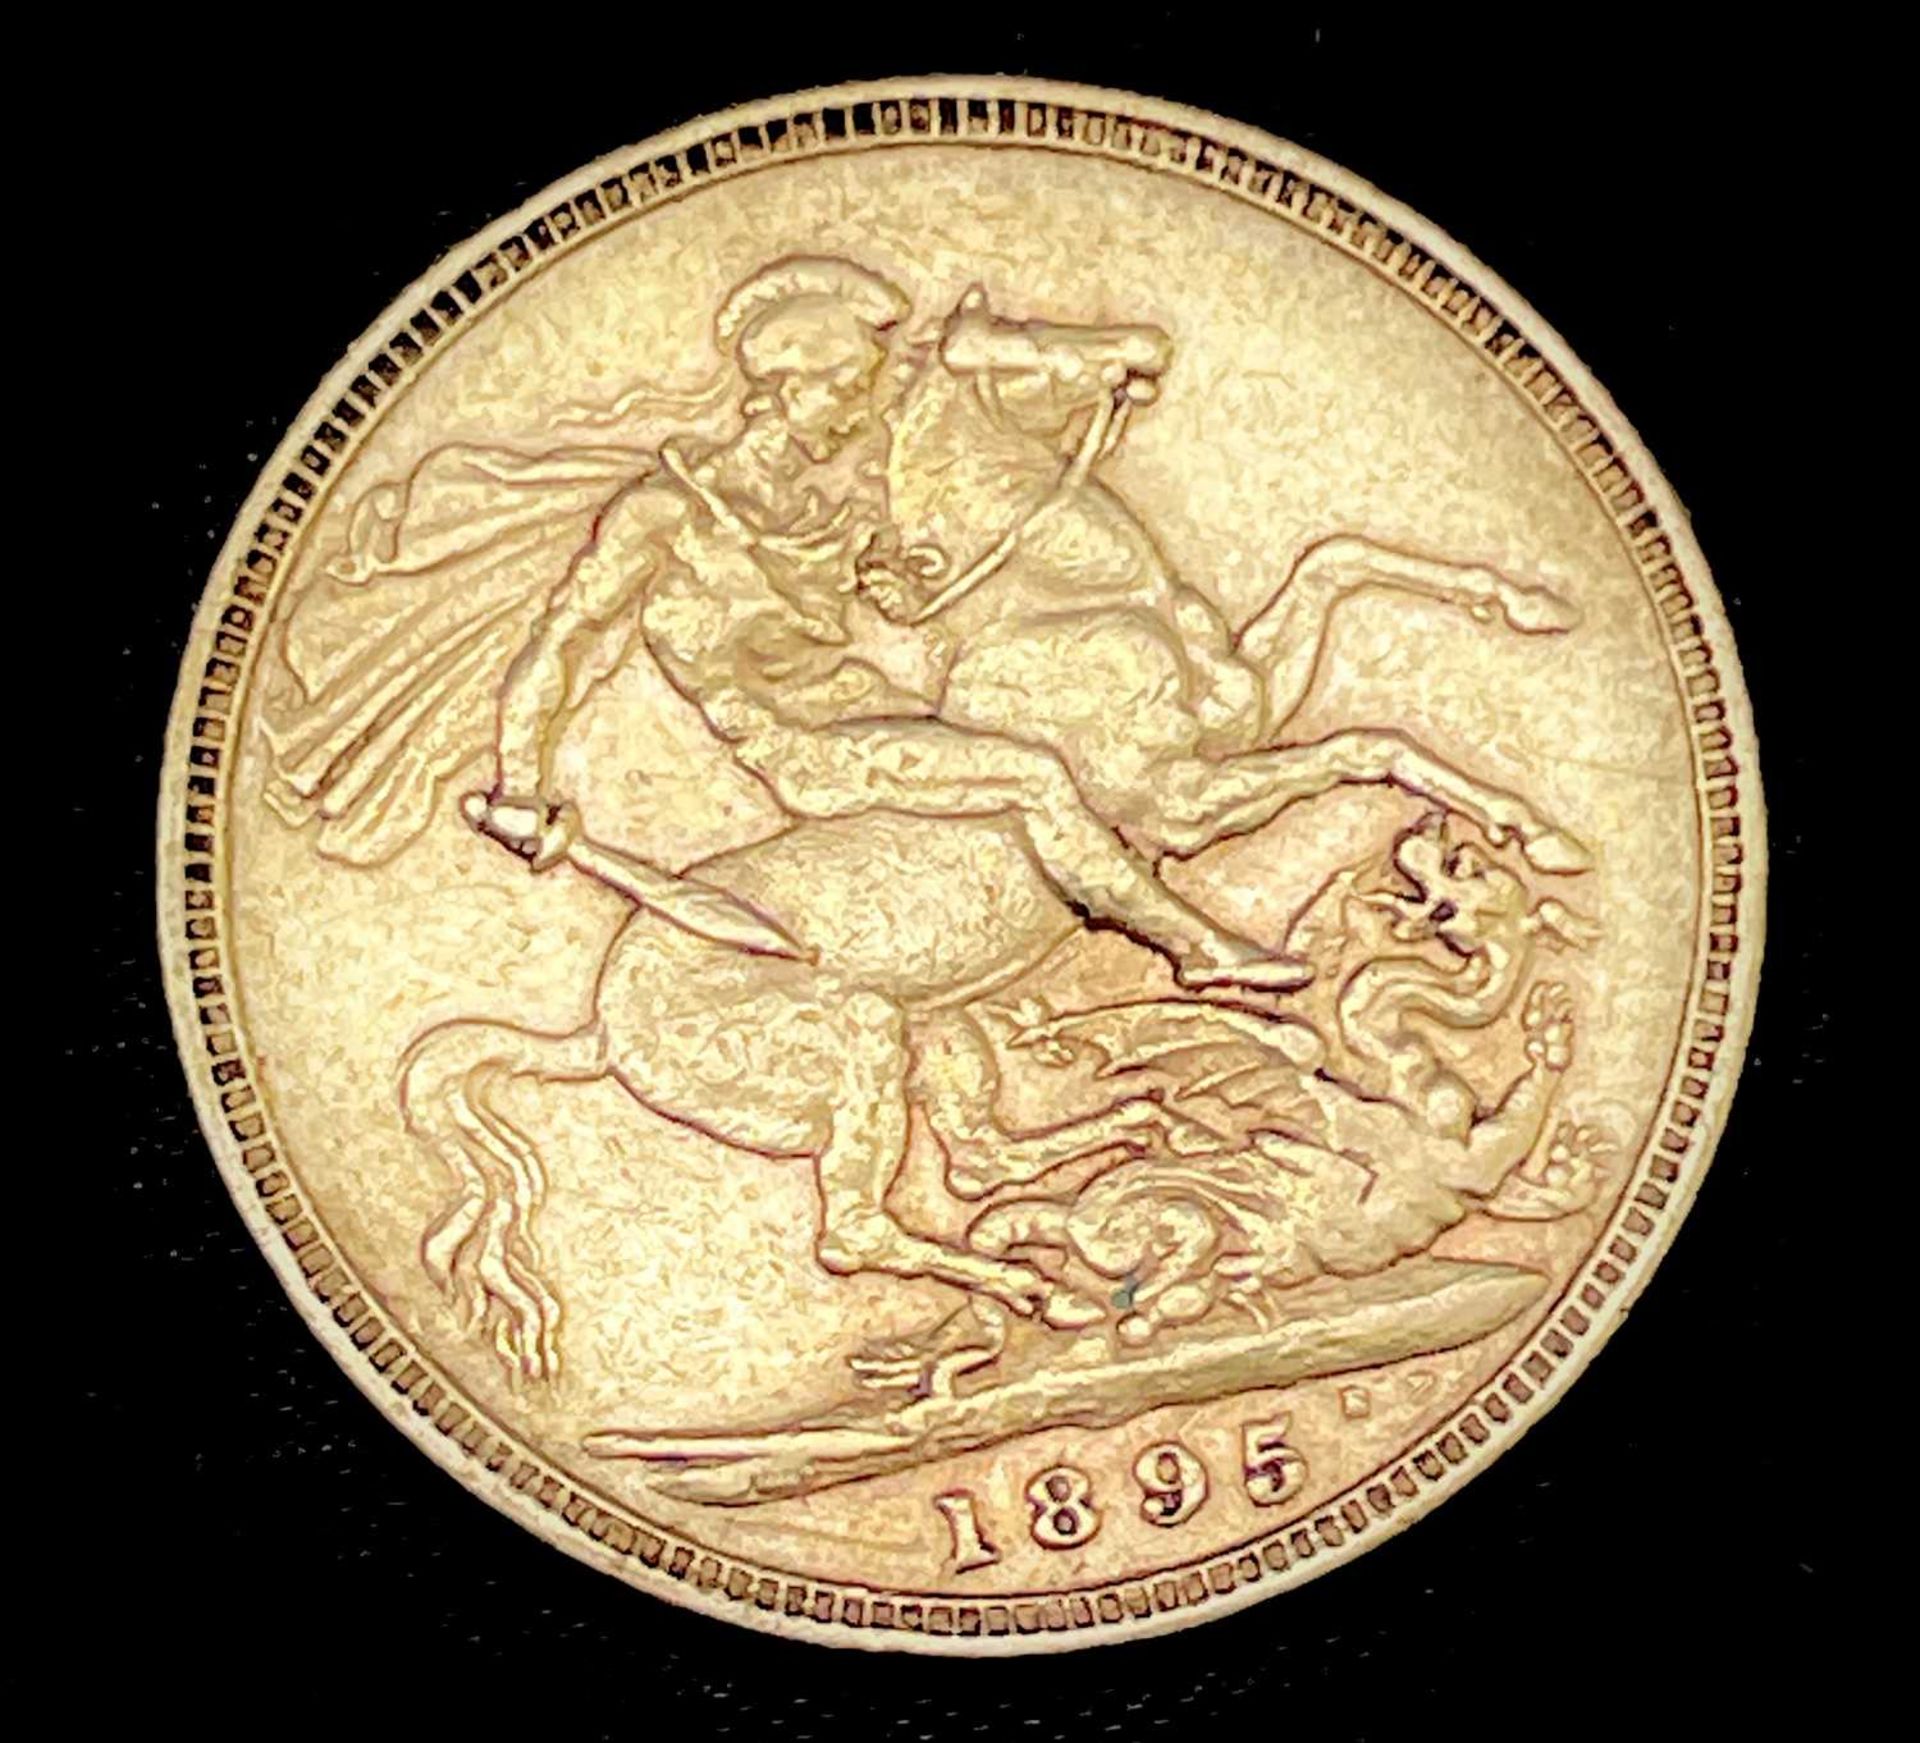 Great Britain Gold Sovereign 1895 Veiled Head Condition: please request a condition report if you